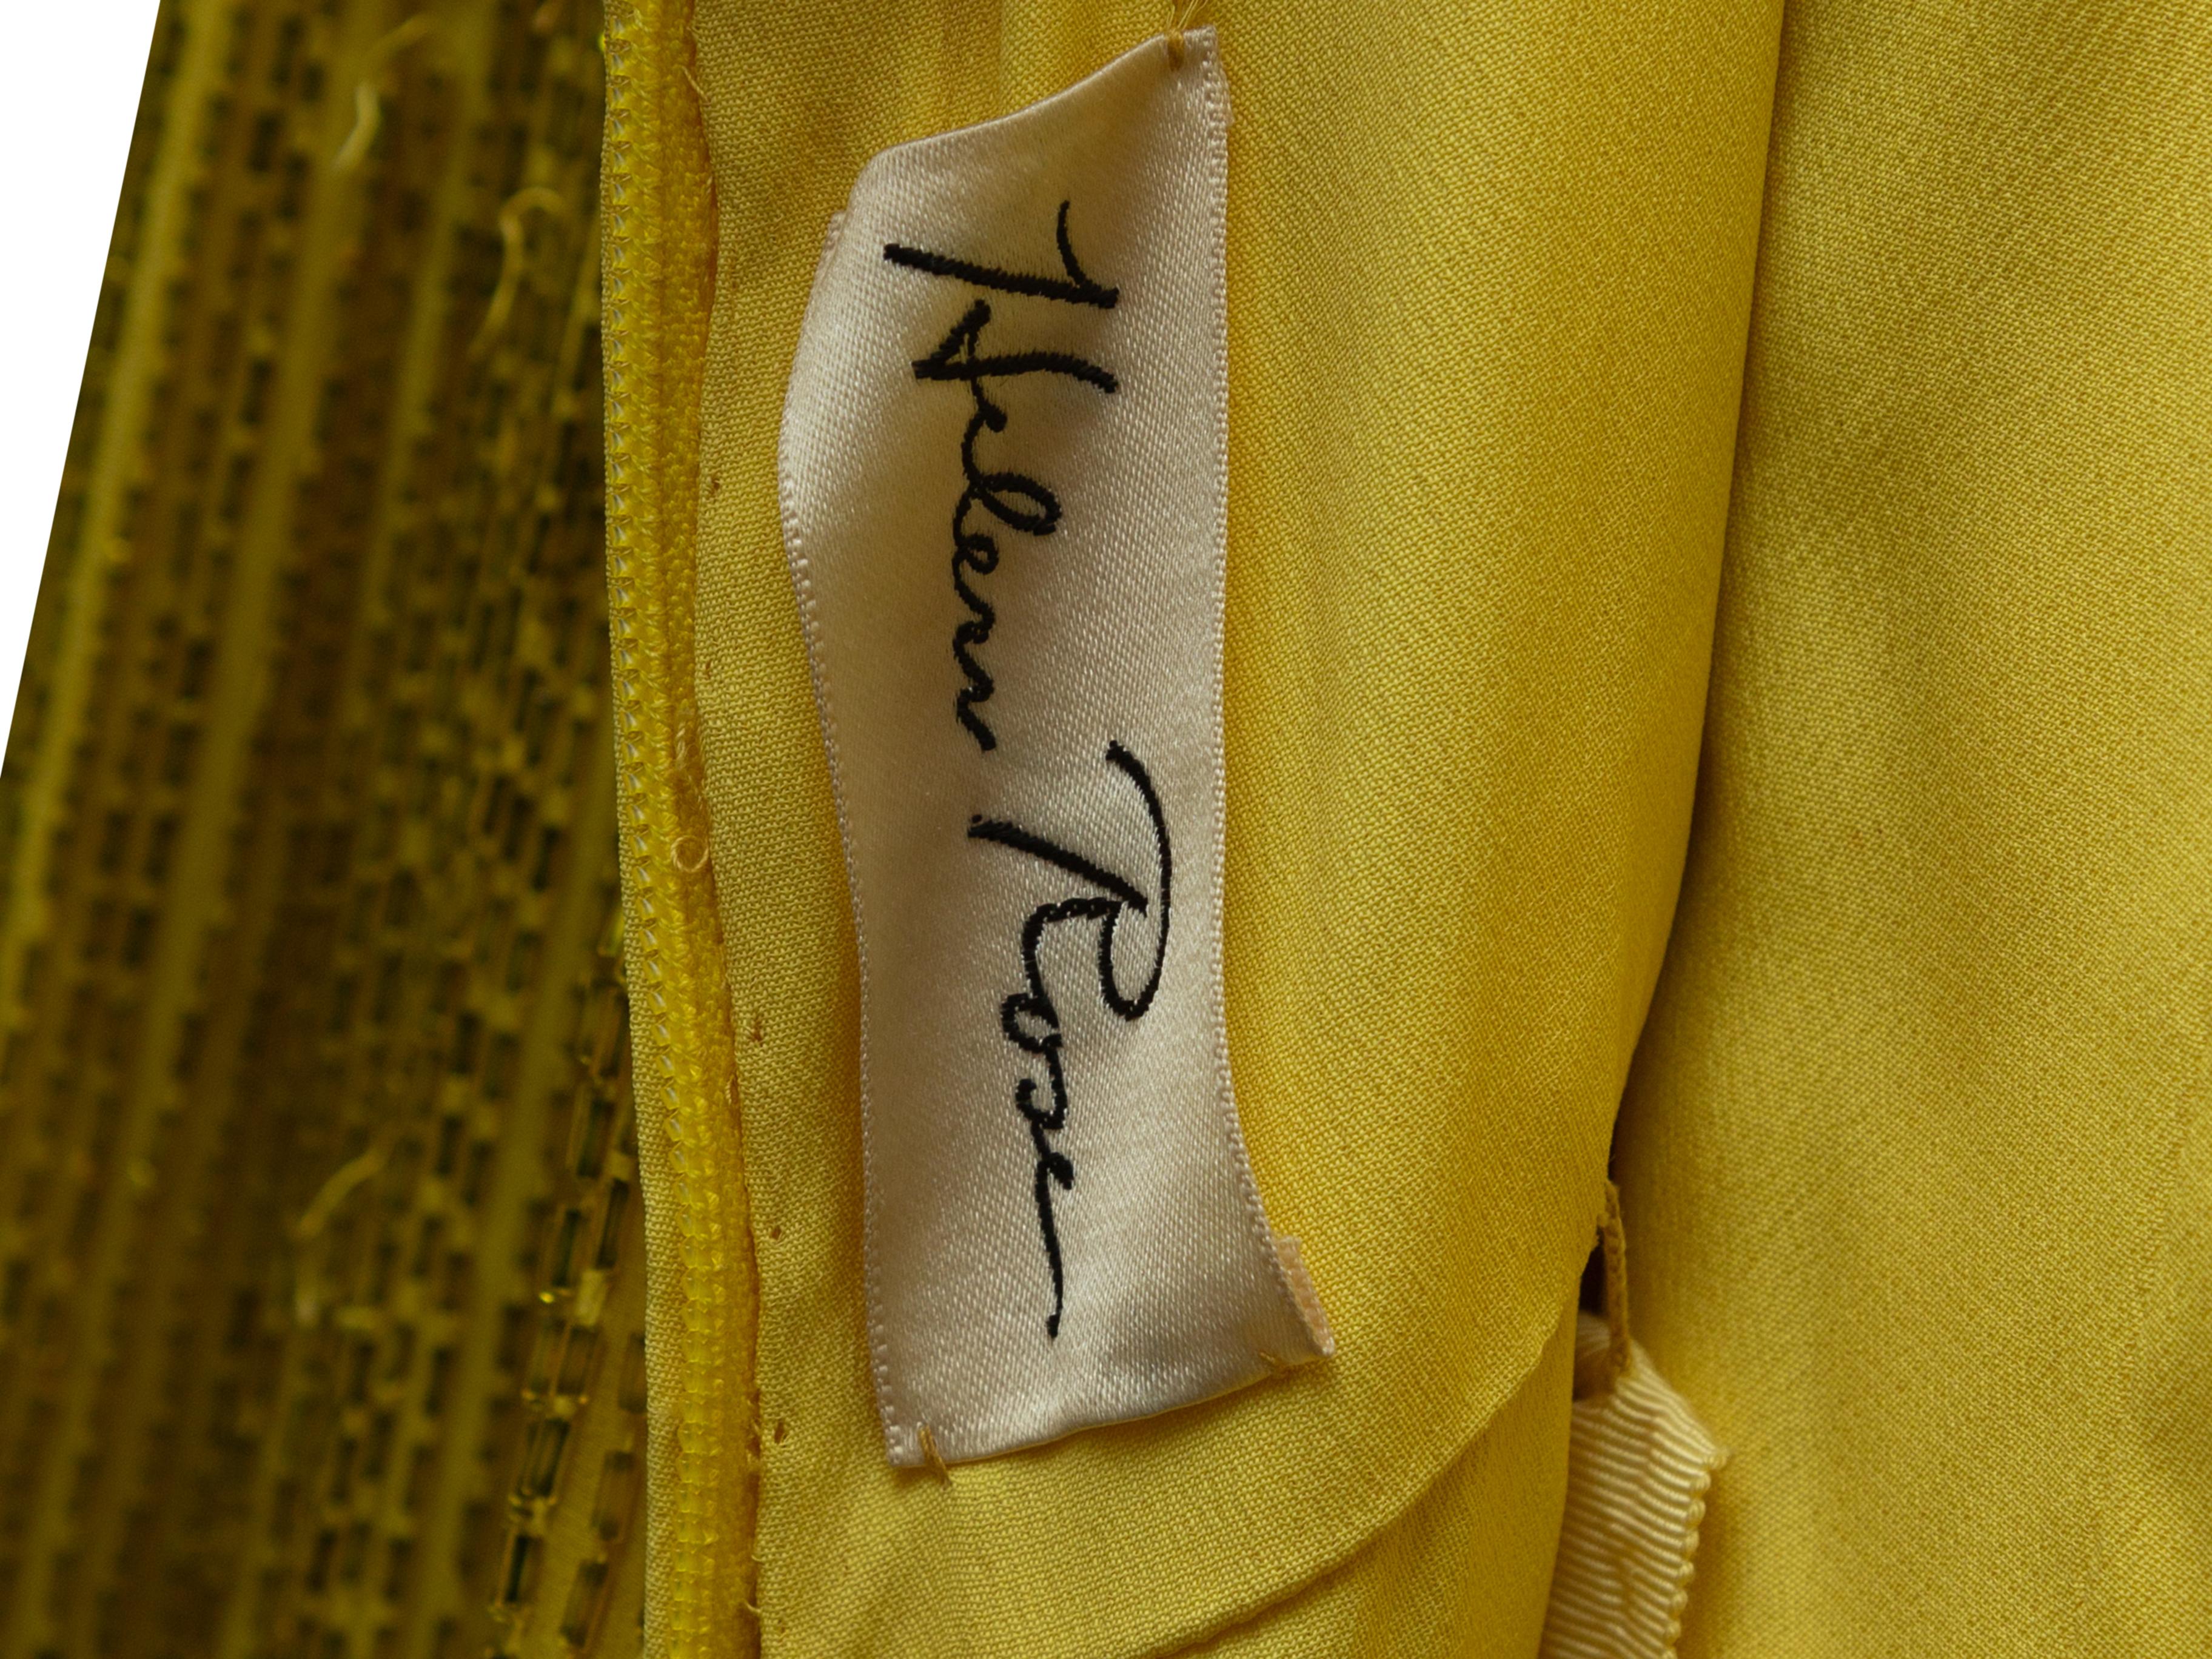 Product details: Vintage yellow evening dress by Helen Rose. Circa 1960s. Bead and sequin embellishments throughout. Scoop neck. Short Sleeves. Zip closure at center back. 28